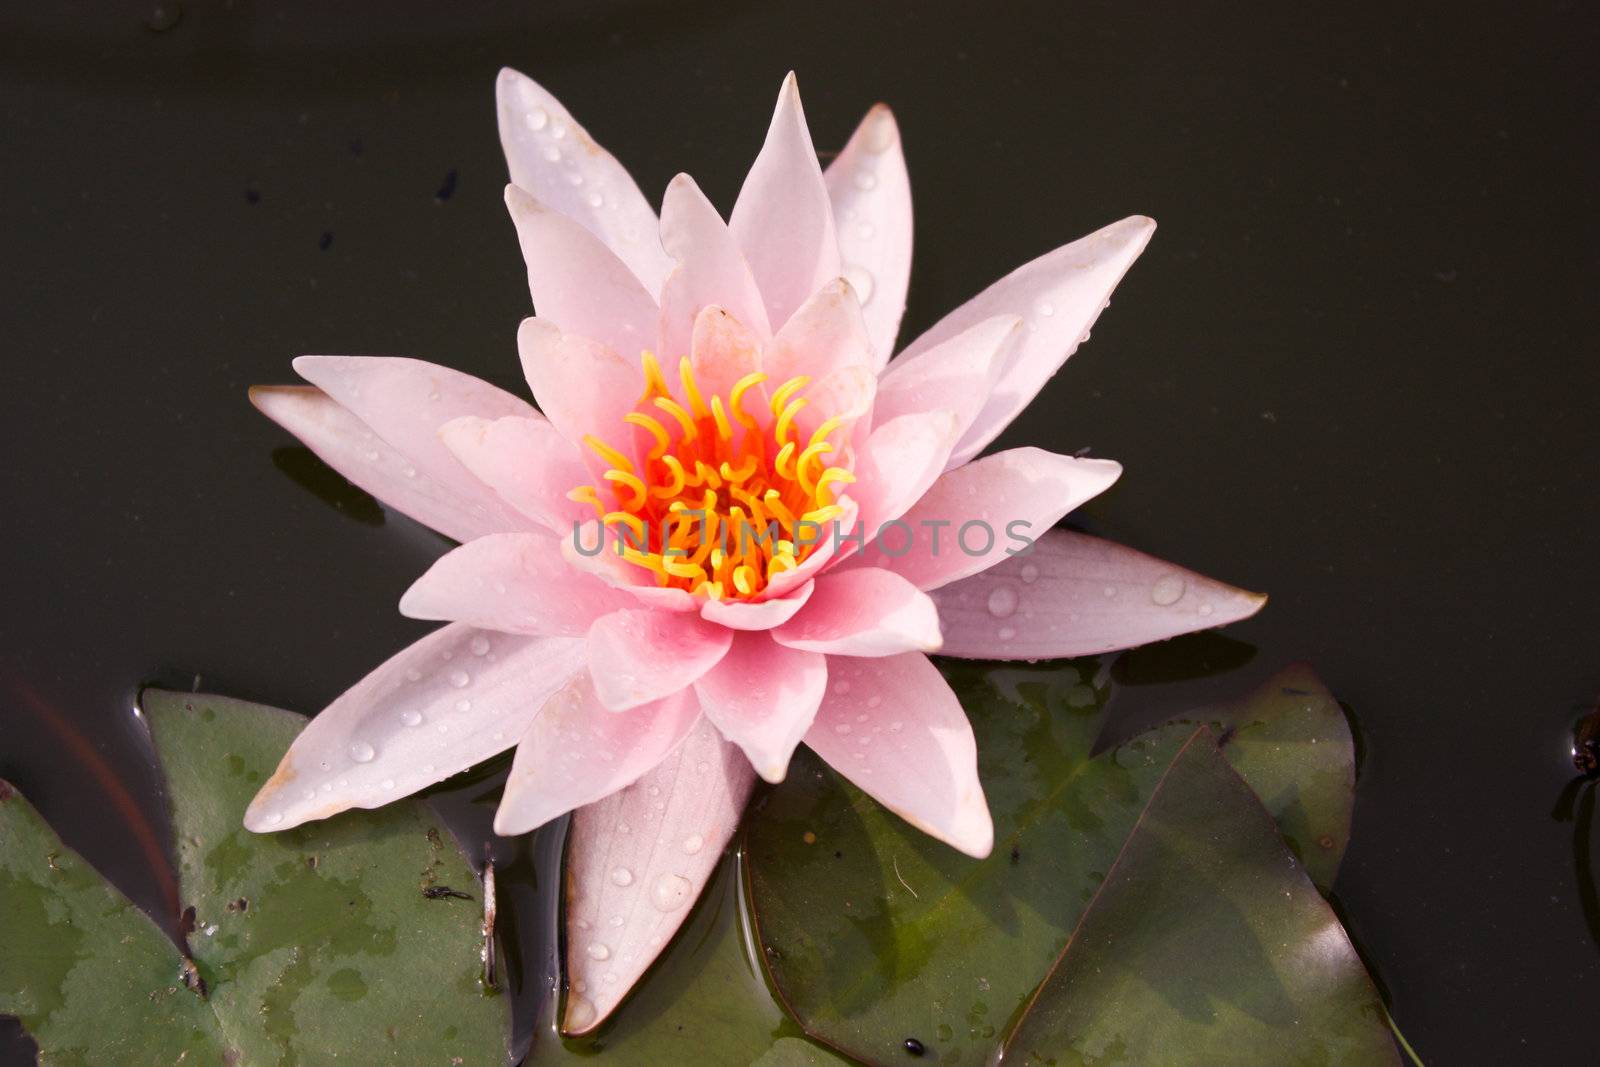 white water lily, lily flower, vegetable, water, lily bloom, calyx, the surface of the pond, the reflection in the water, the petals of lily, rose petals, a perennial plant, water plant